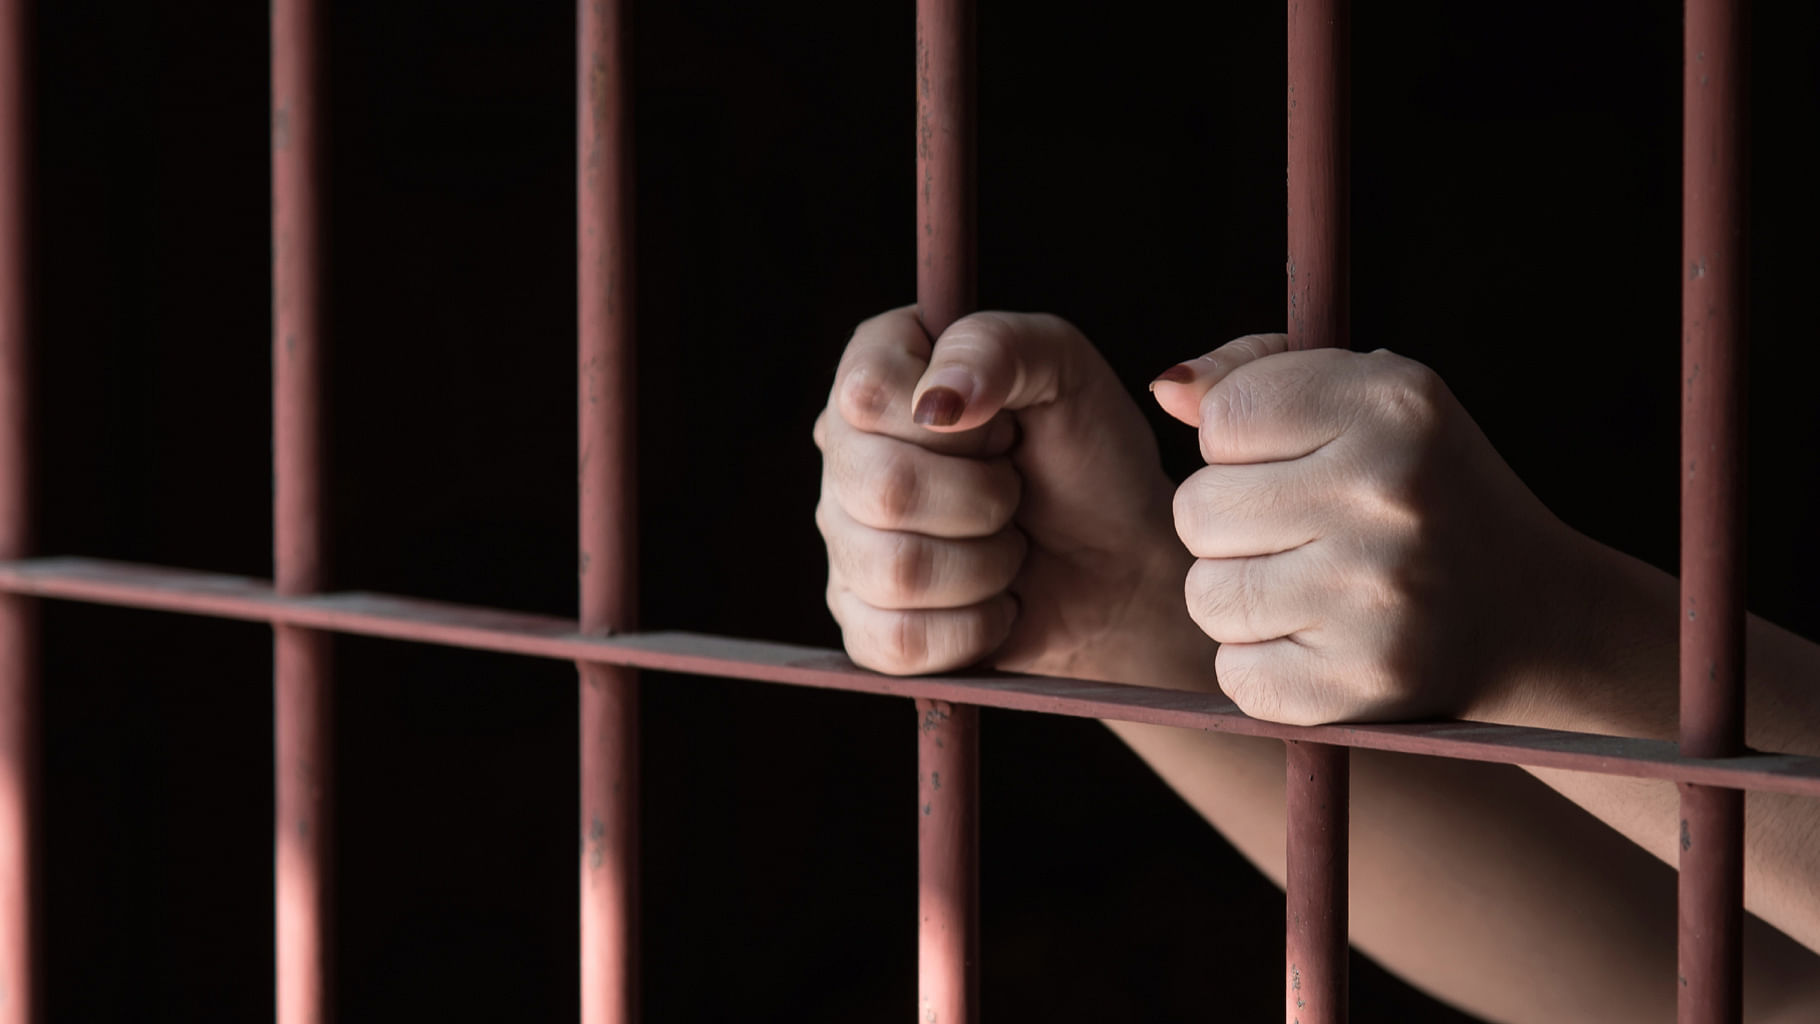 There are at least 19 “offenders” inside the facility. (Photo: iStockPhoto)